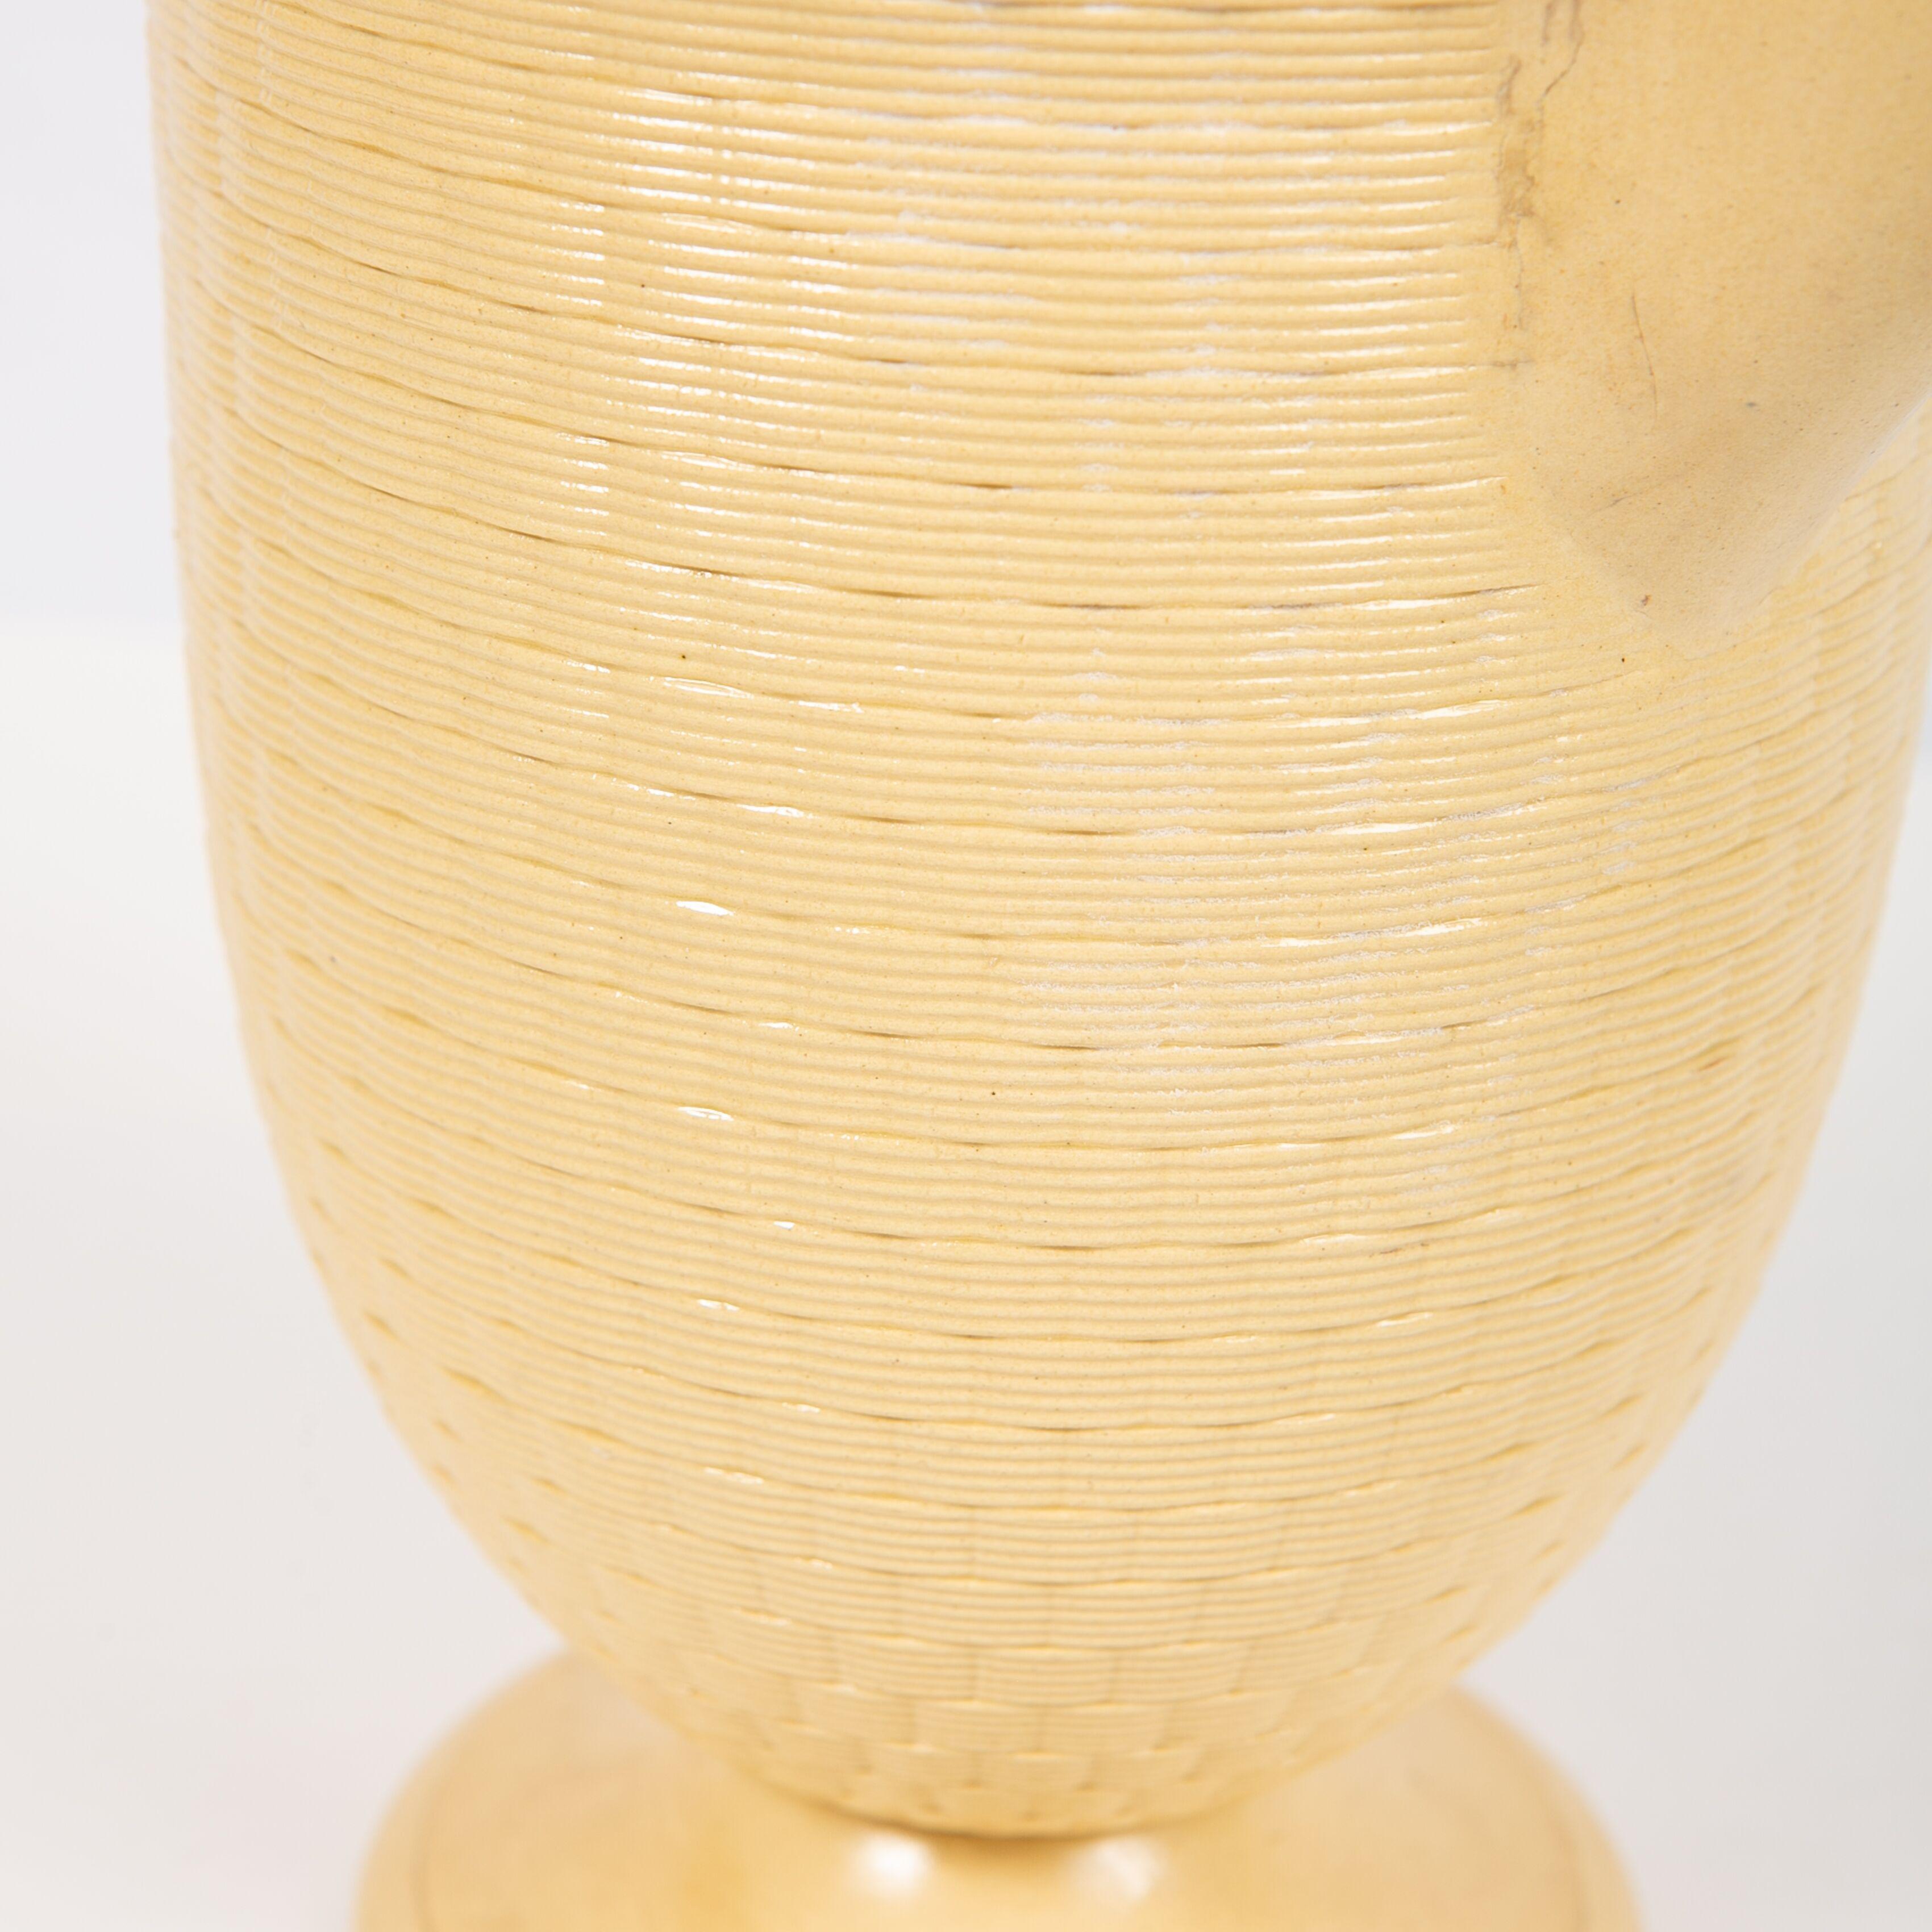 The luscious cane-yellow color of this coffee pot was a Wedgwood specialty in the 1830s. The inspiration for this special color was fields of wheat. So it makes sense that the finial on the cover was made in the form of a sheaf of wheat. 
Both the